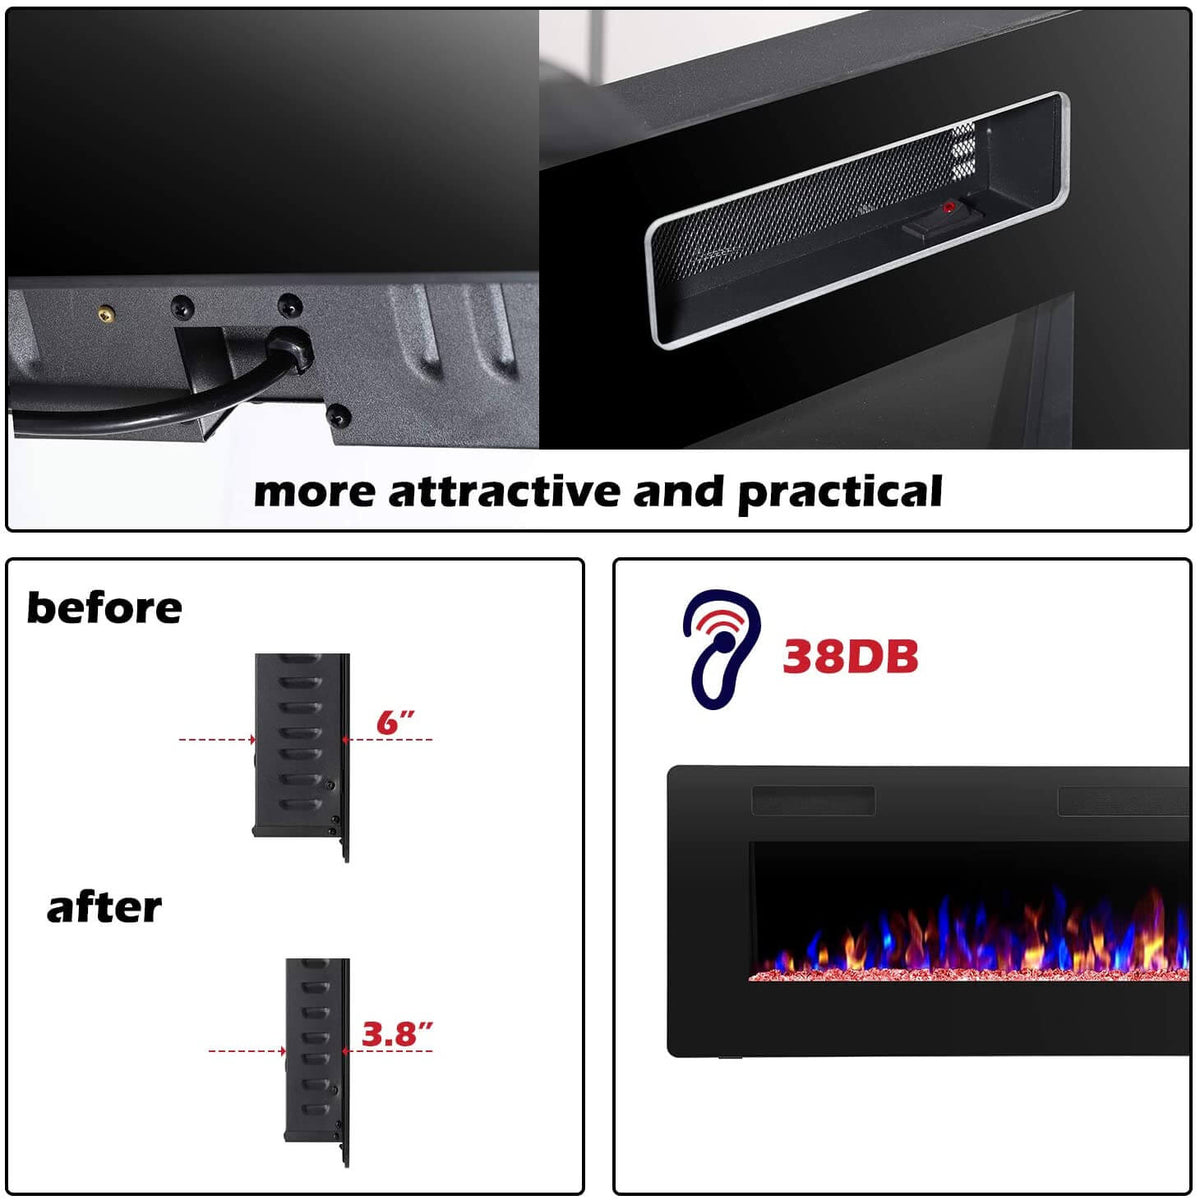 RW Flame 850C 750W-1500W 50 Inch Recessed and Wall Mounted Electric Fireplace With Remote Control Black New